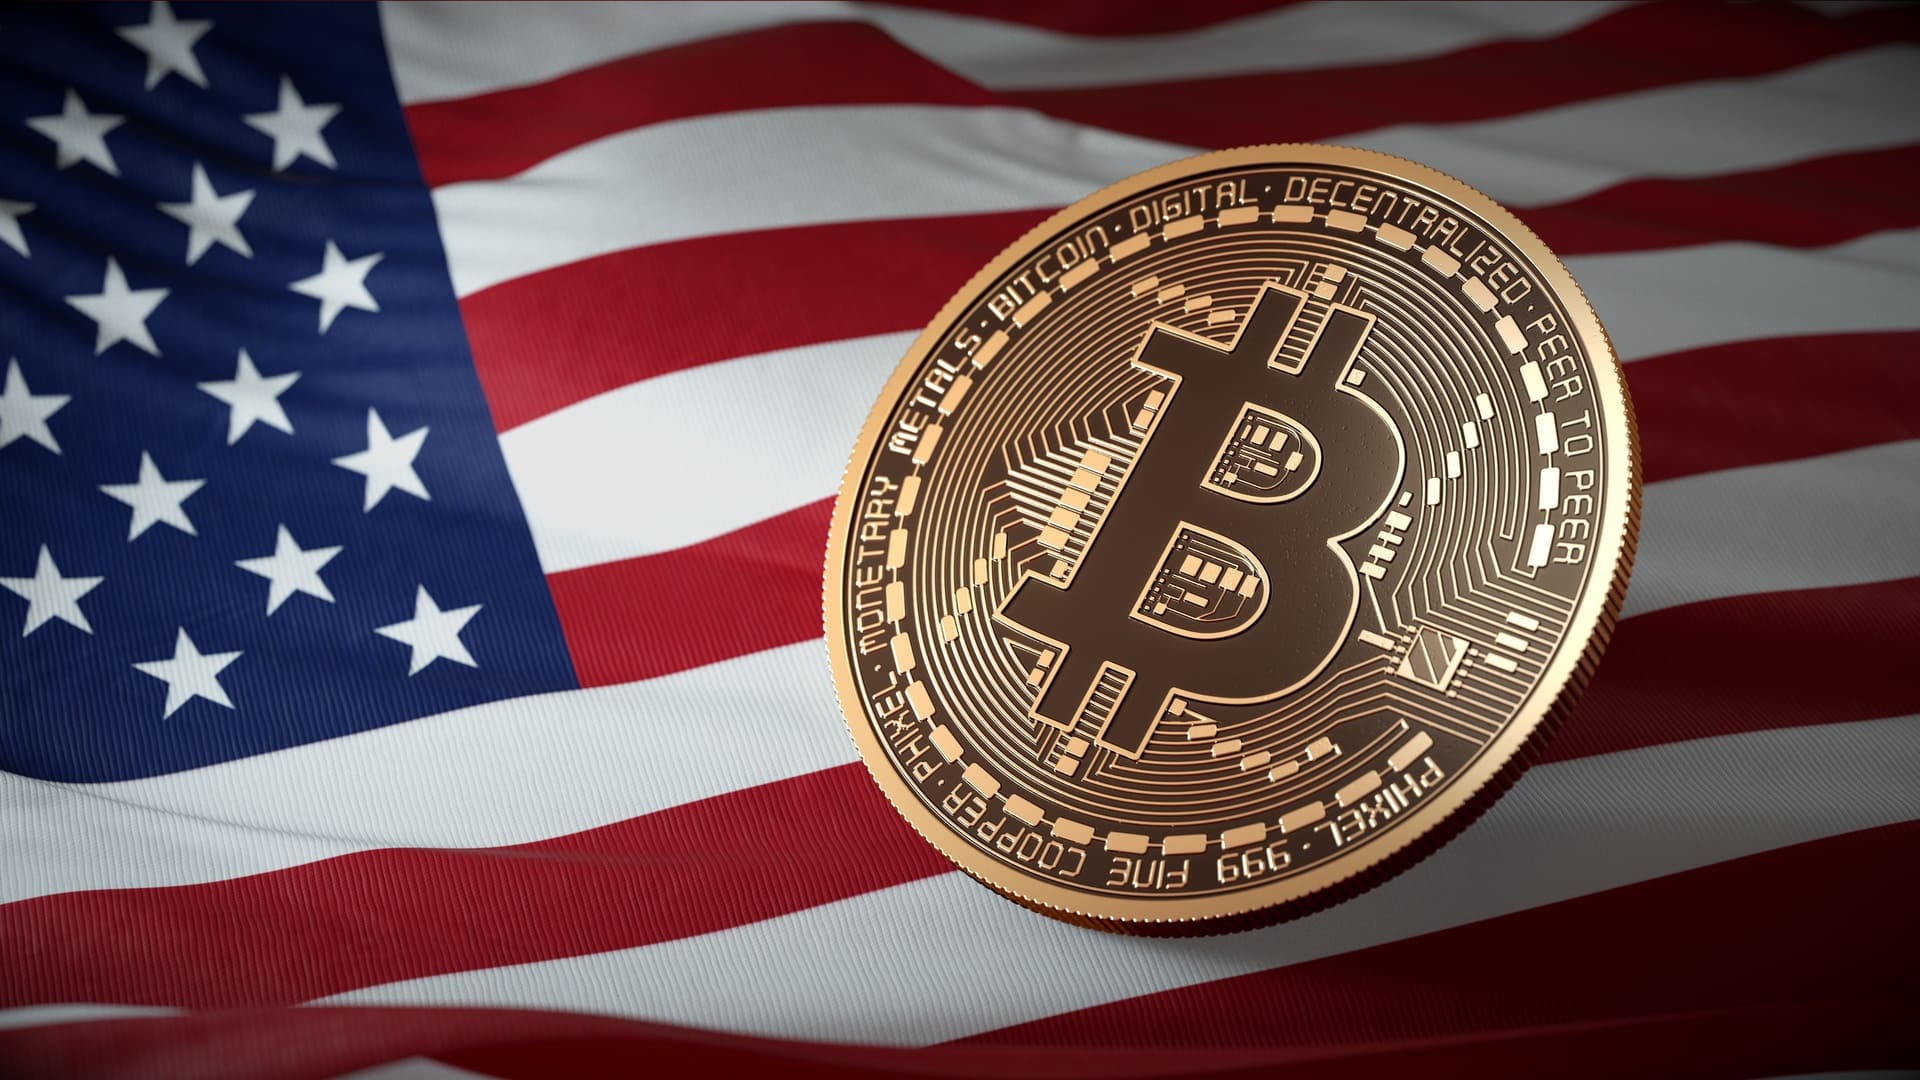 U.S. Crypto Law to Temporarily Ban Algorithmic Stablecoins